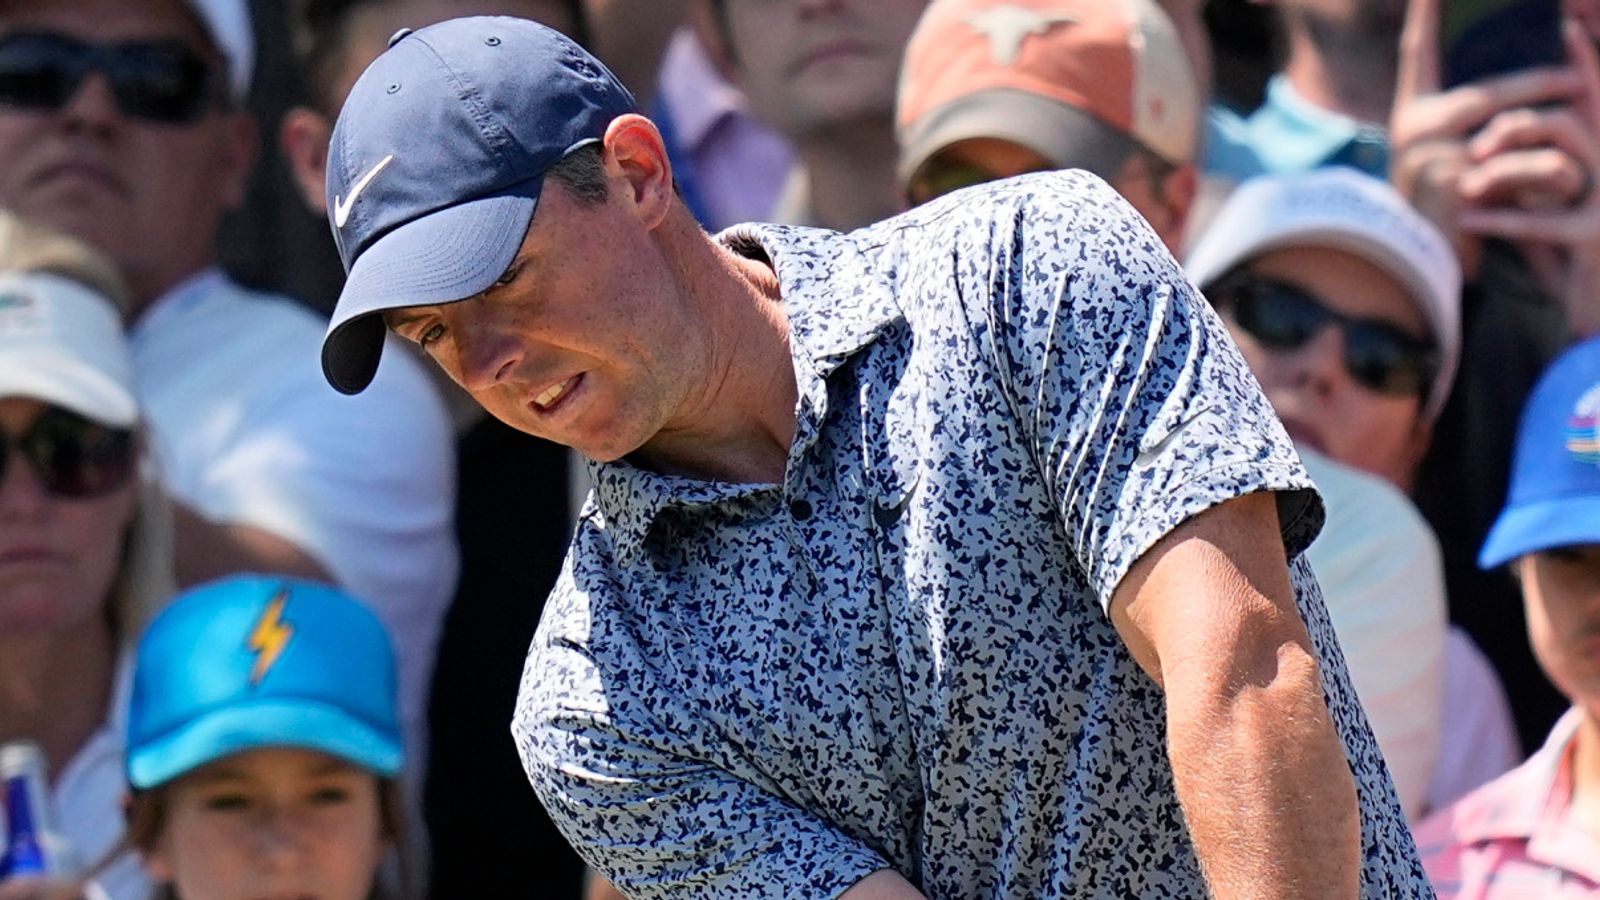 Rory McIlroy qualifies for WGC-Dell Technologies Match Play semi-finals after Xander Schauffele nail-biter | Golf news thumbnail